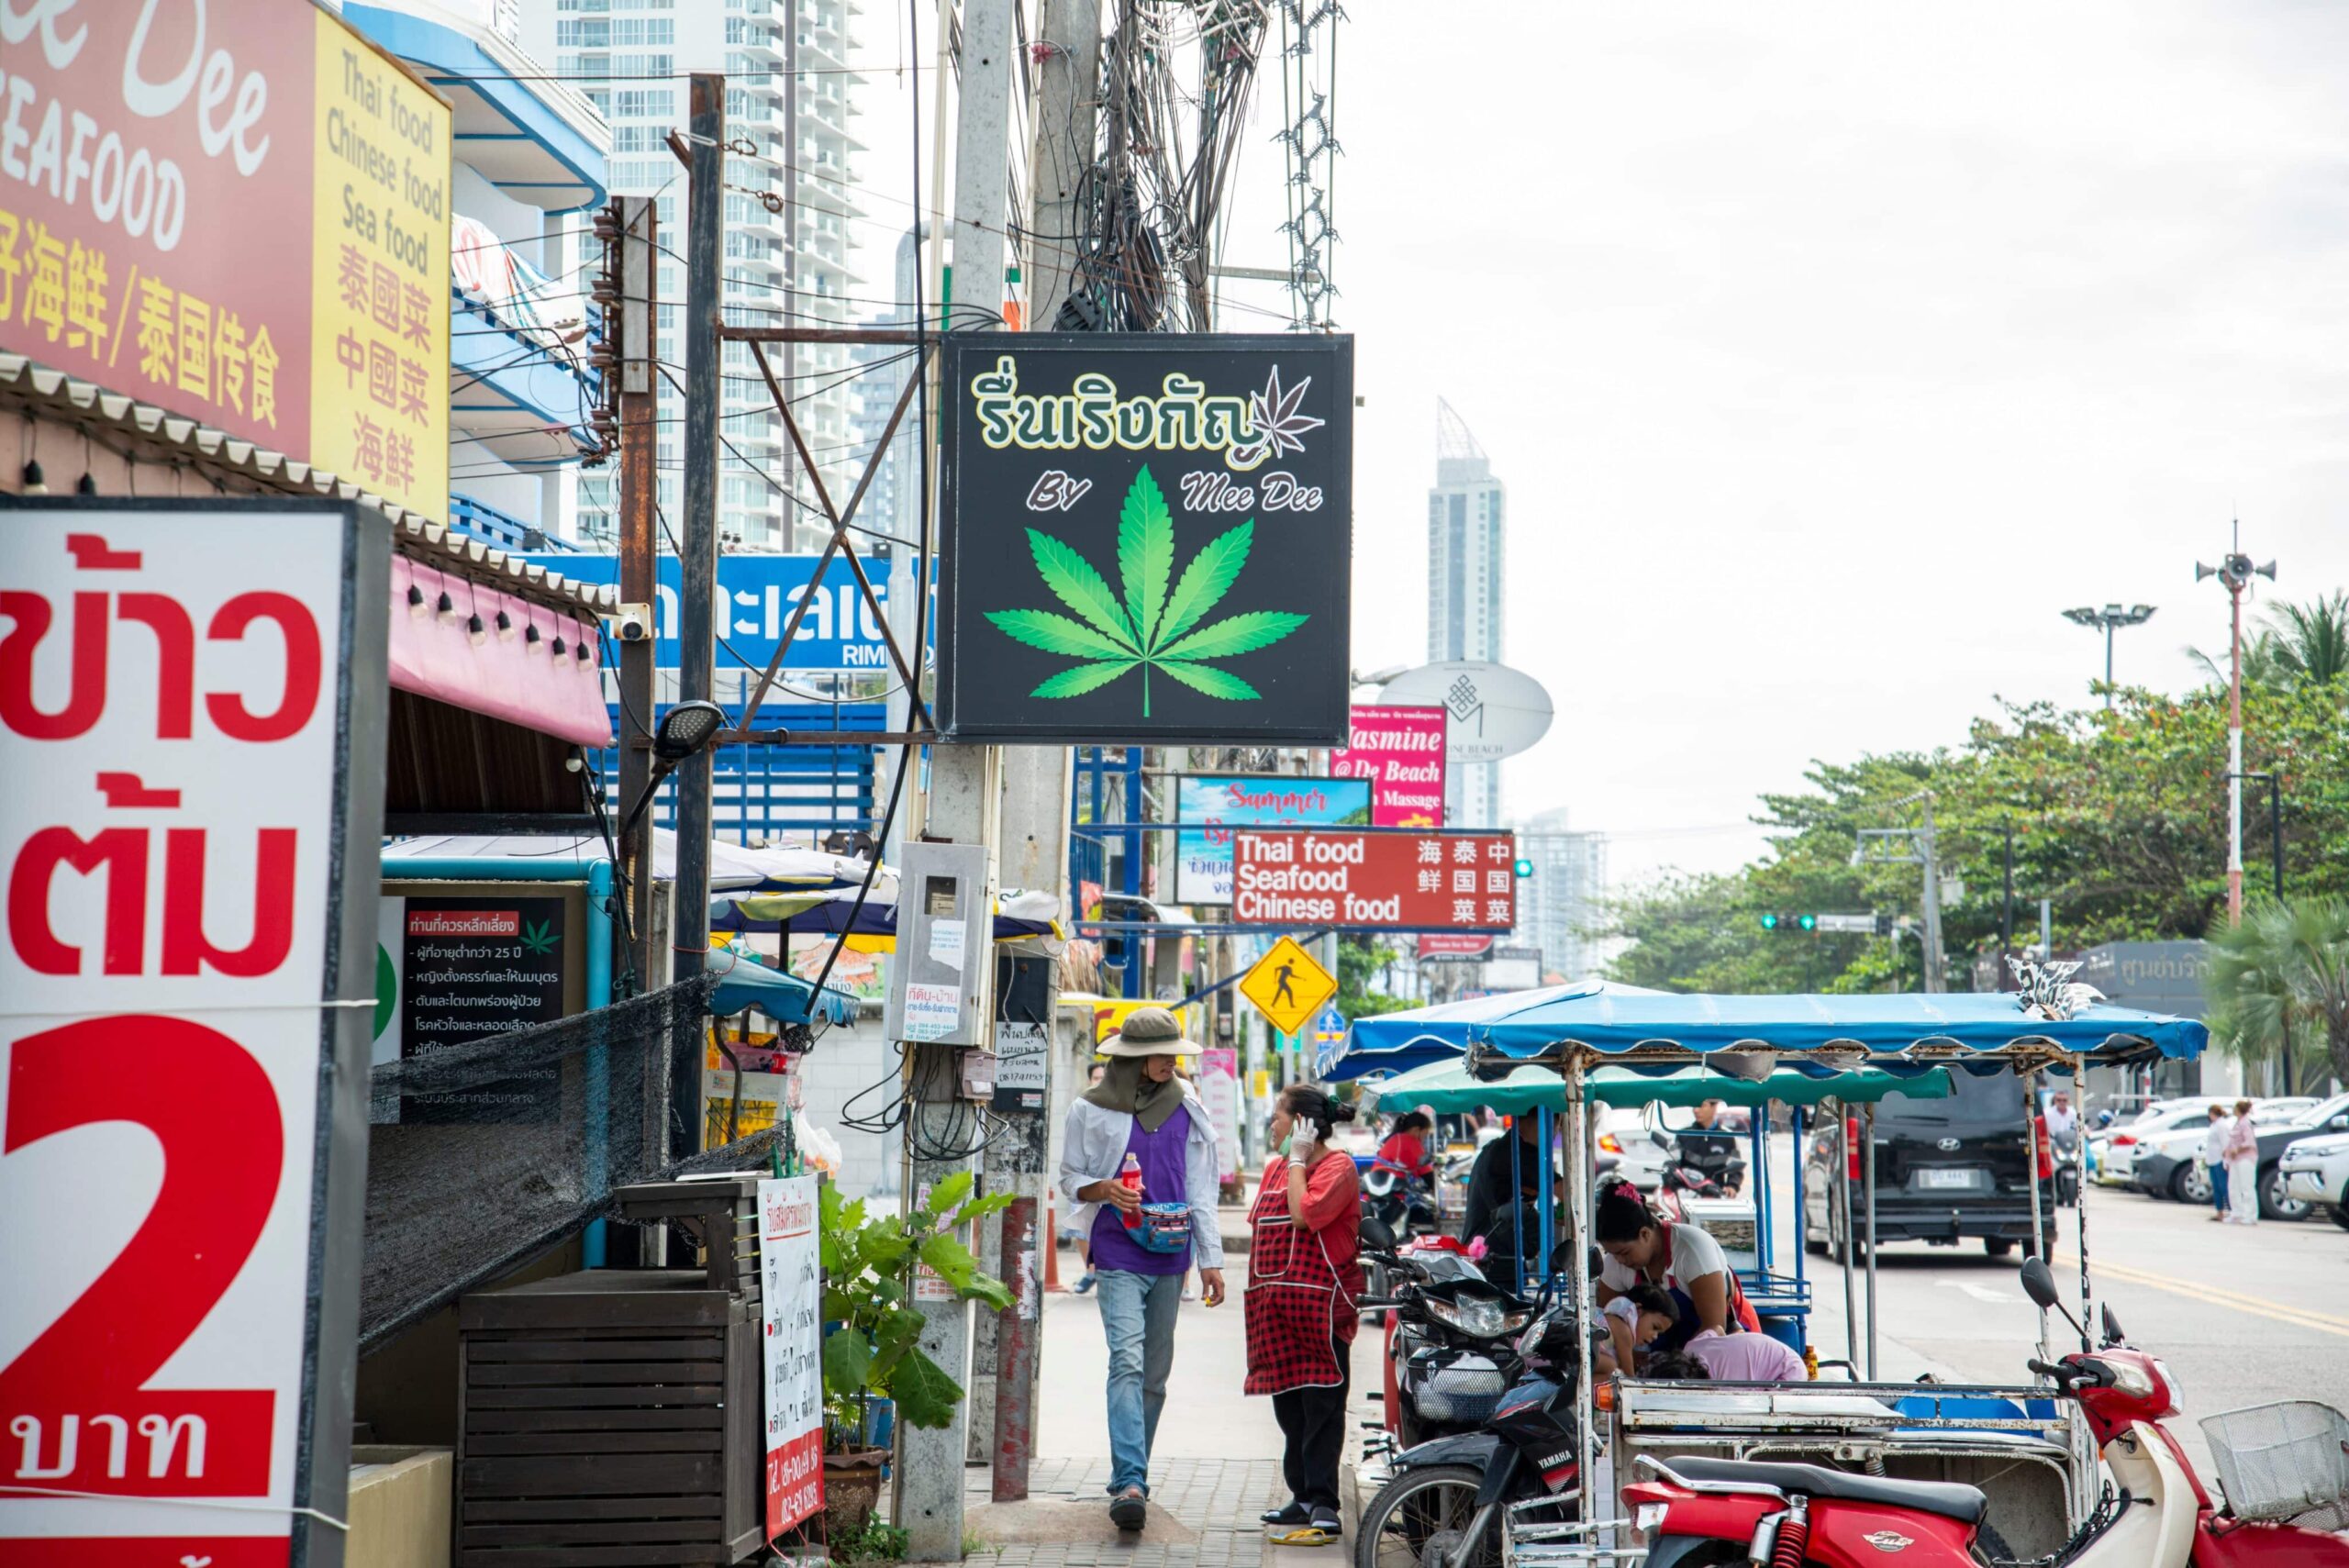 Thailand Leaders Scramble To Backpedal Law as 6,000 Pot Shops Open